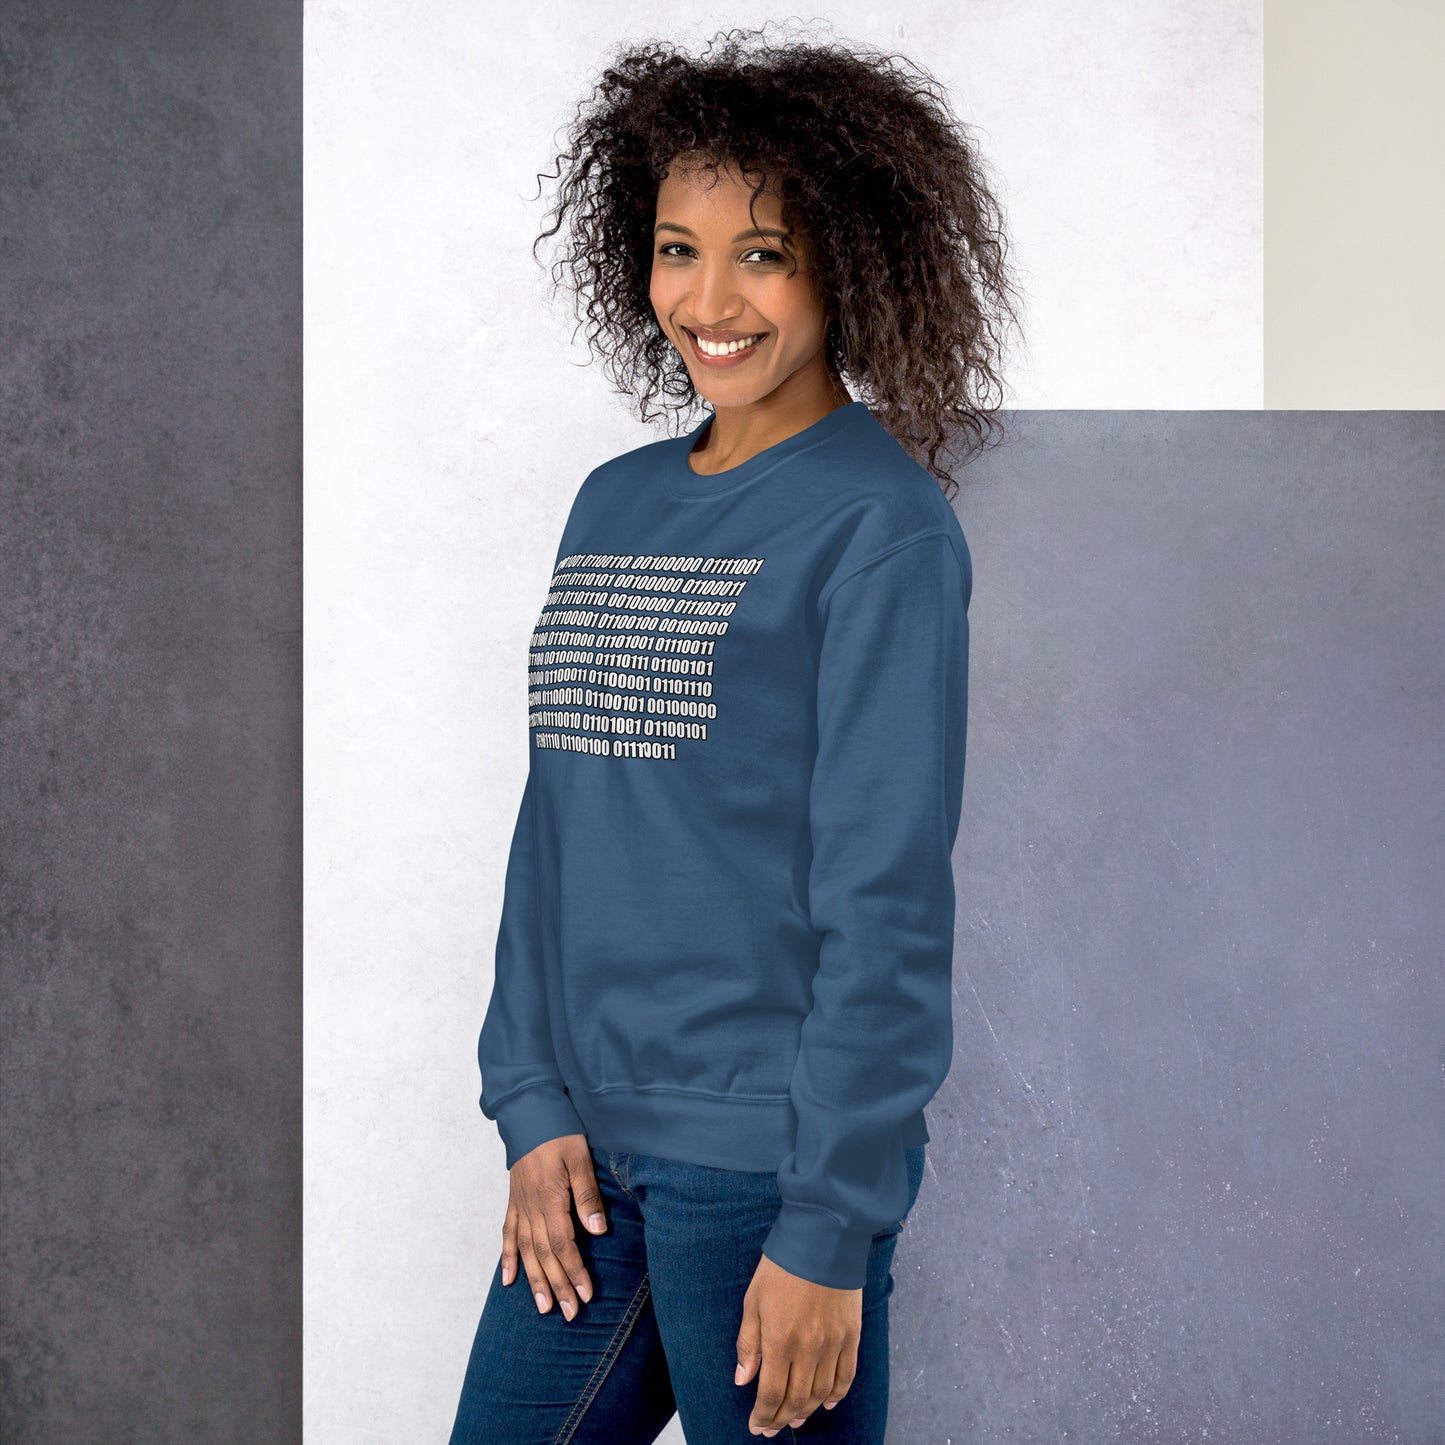 Women with indigo blue sweatshirt with binaire text "If you can read this"